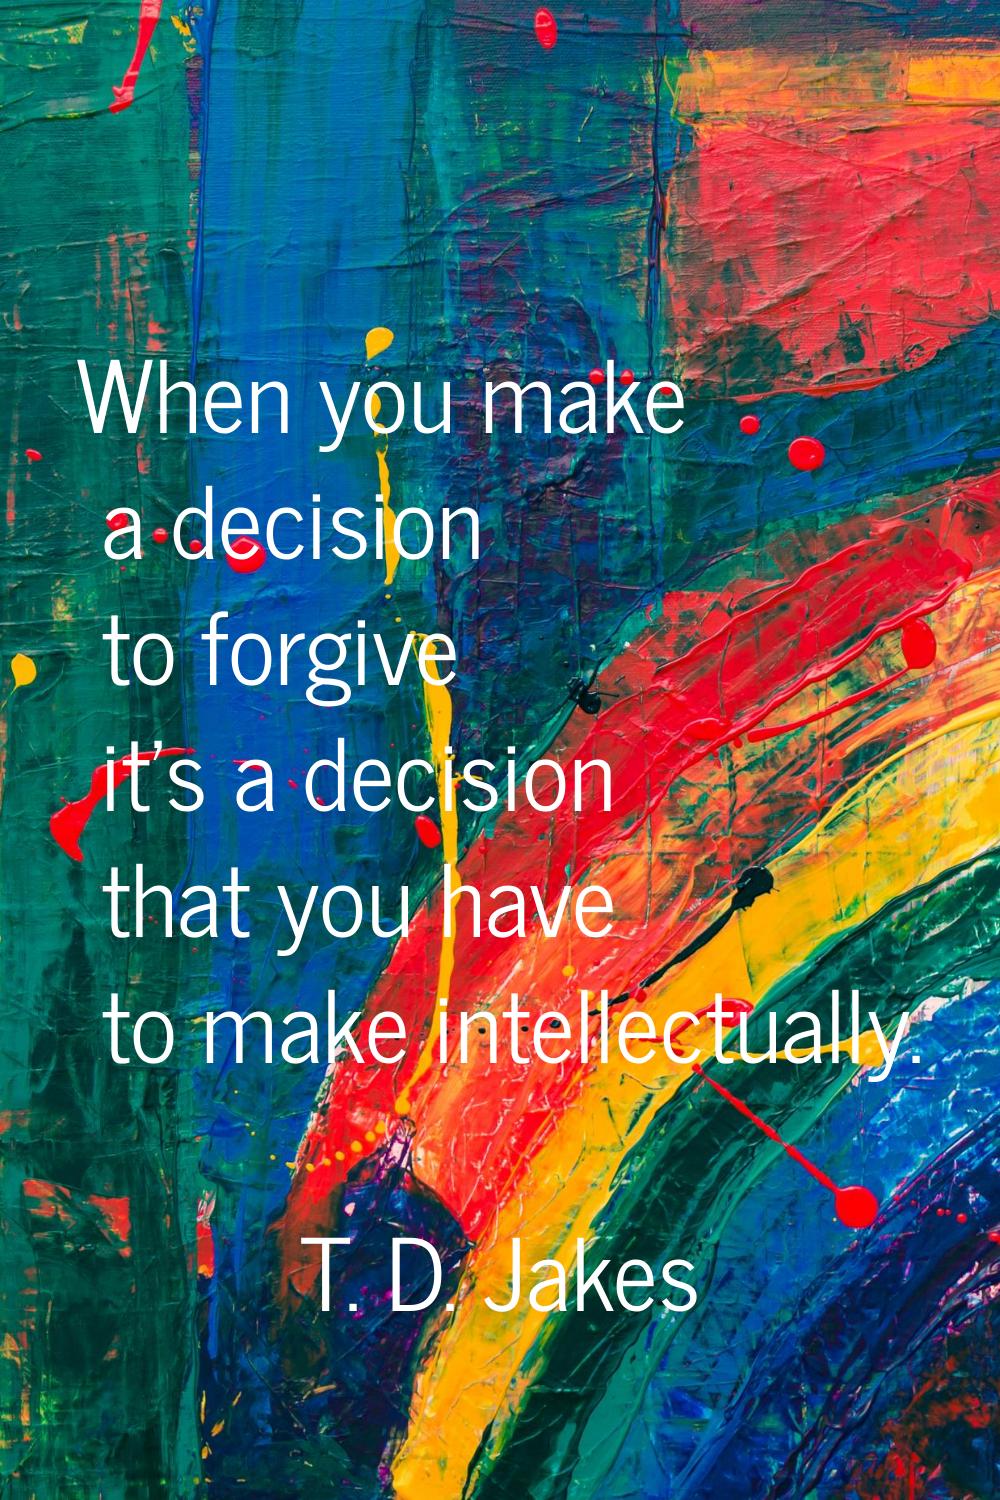 When you make a decision to forgive it's a decision that you have to make intellectually.